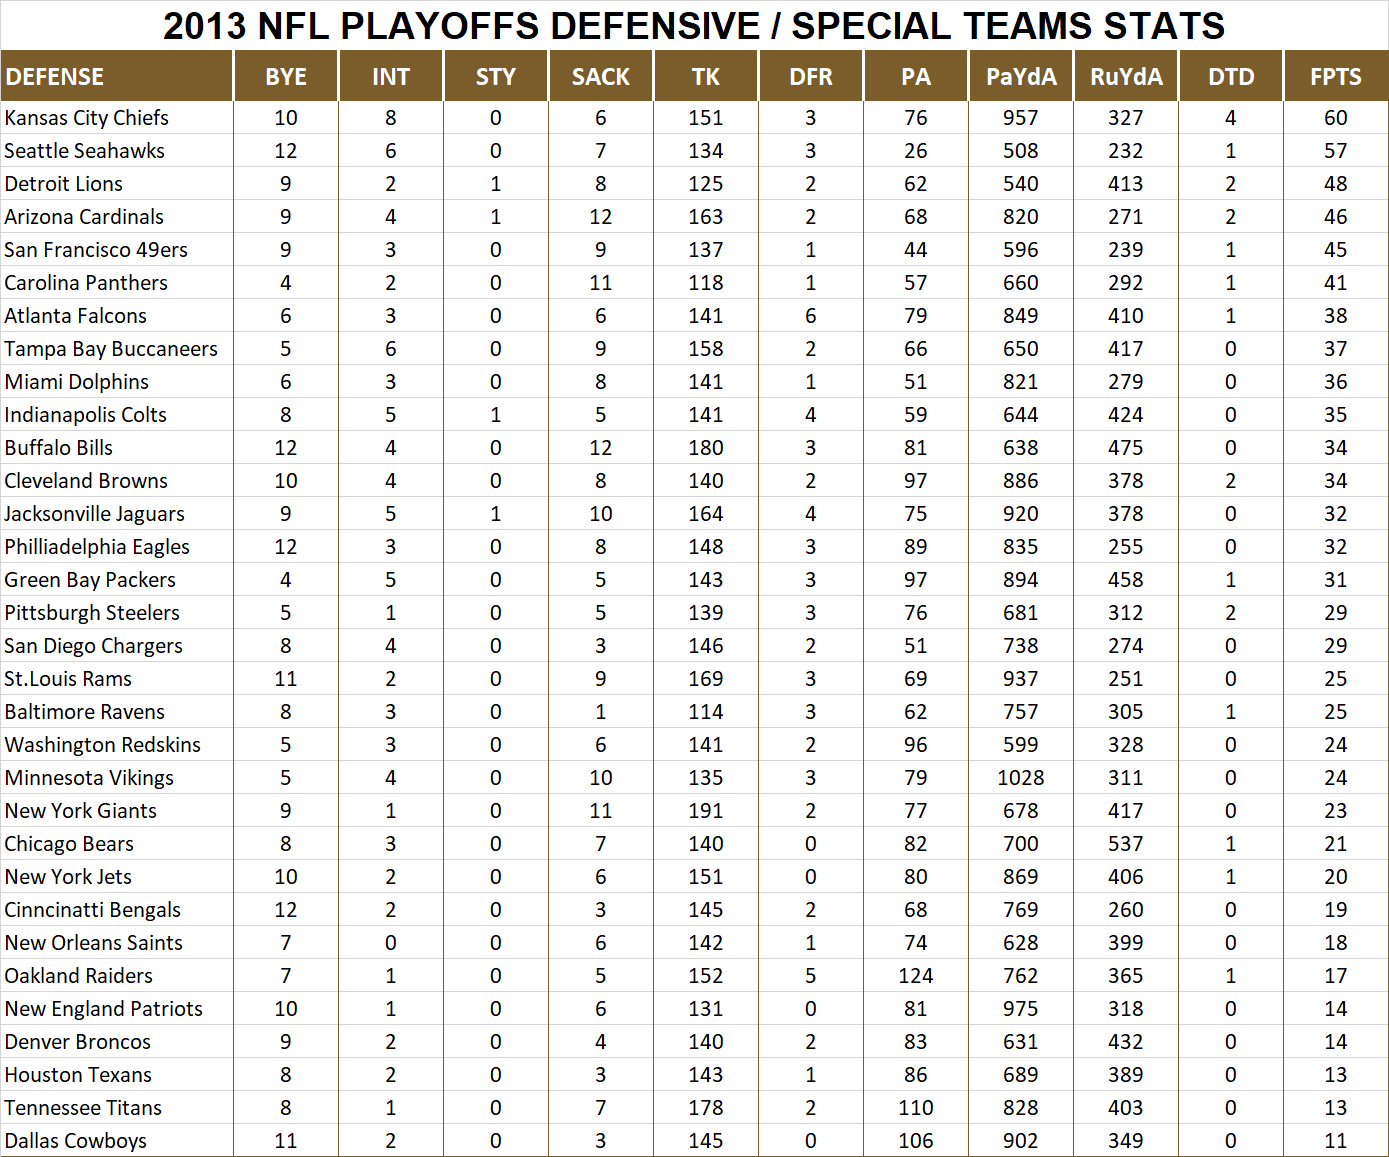 2013 National Football League Pool Playoff Player Defensive Stats